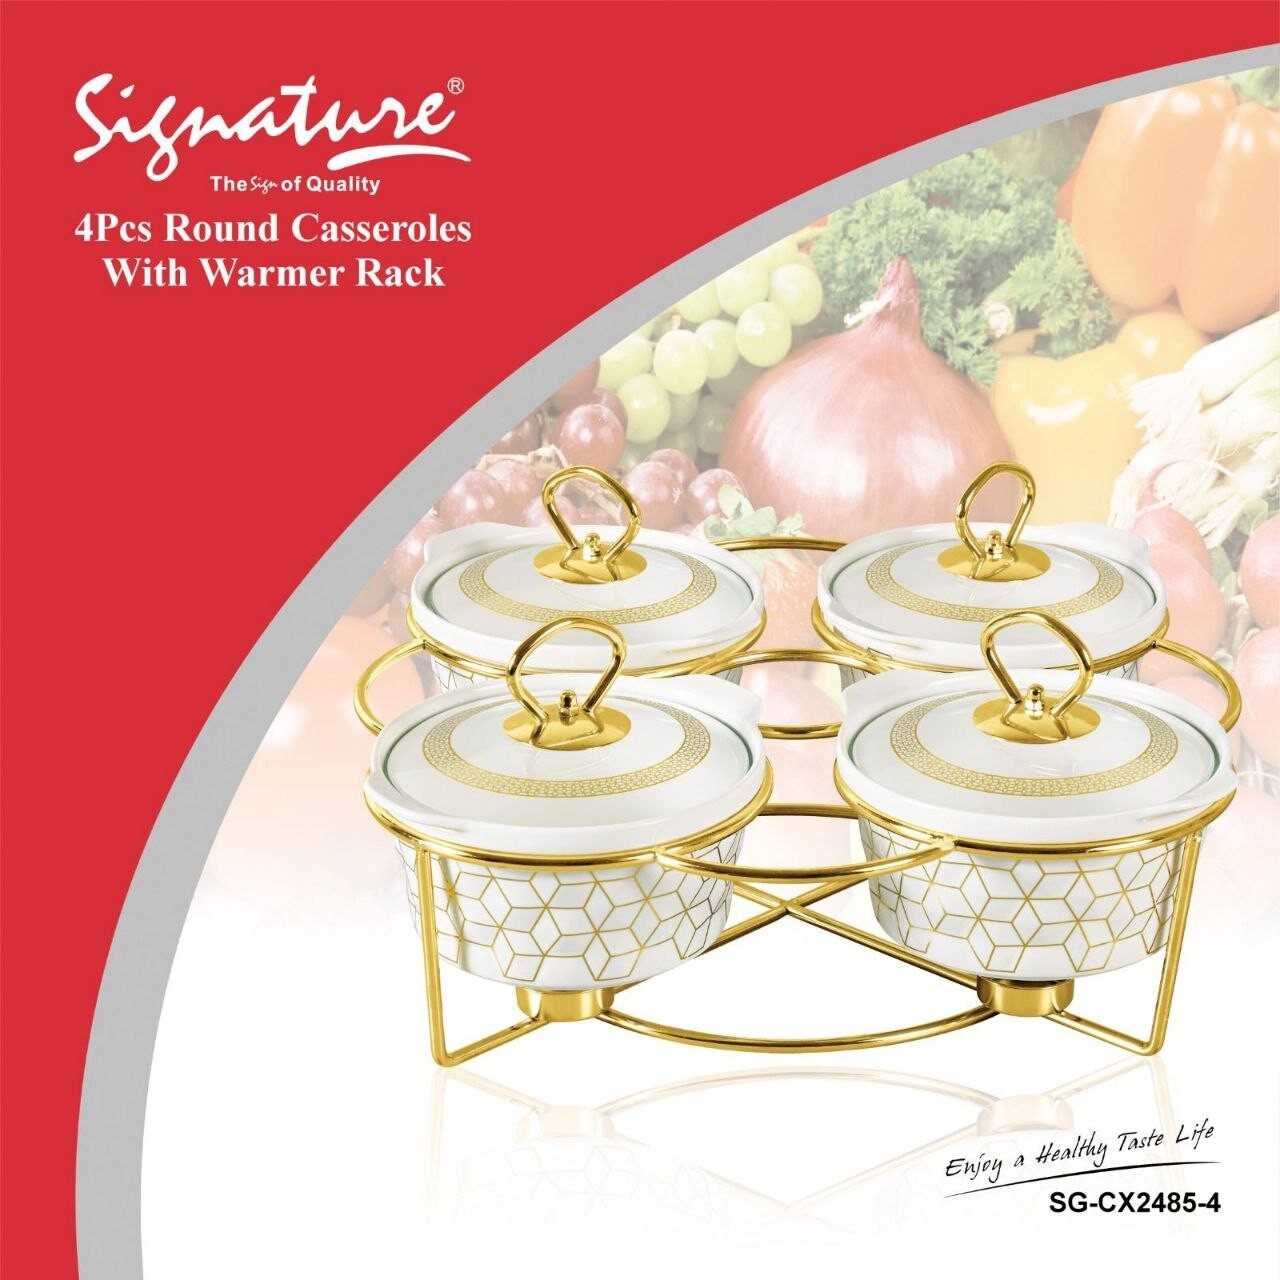 Signature 4pcs 7" round chafing dish set porcelain with warmer plates SG-2845-5 Food warmer. Unlike normal chafing dish, the bowls can be removed from the rack and passed around the dining table